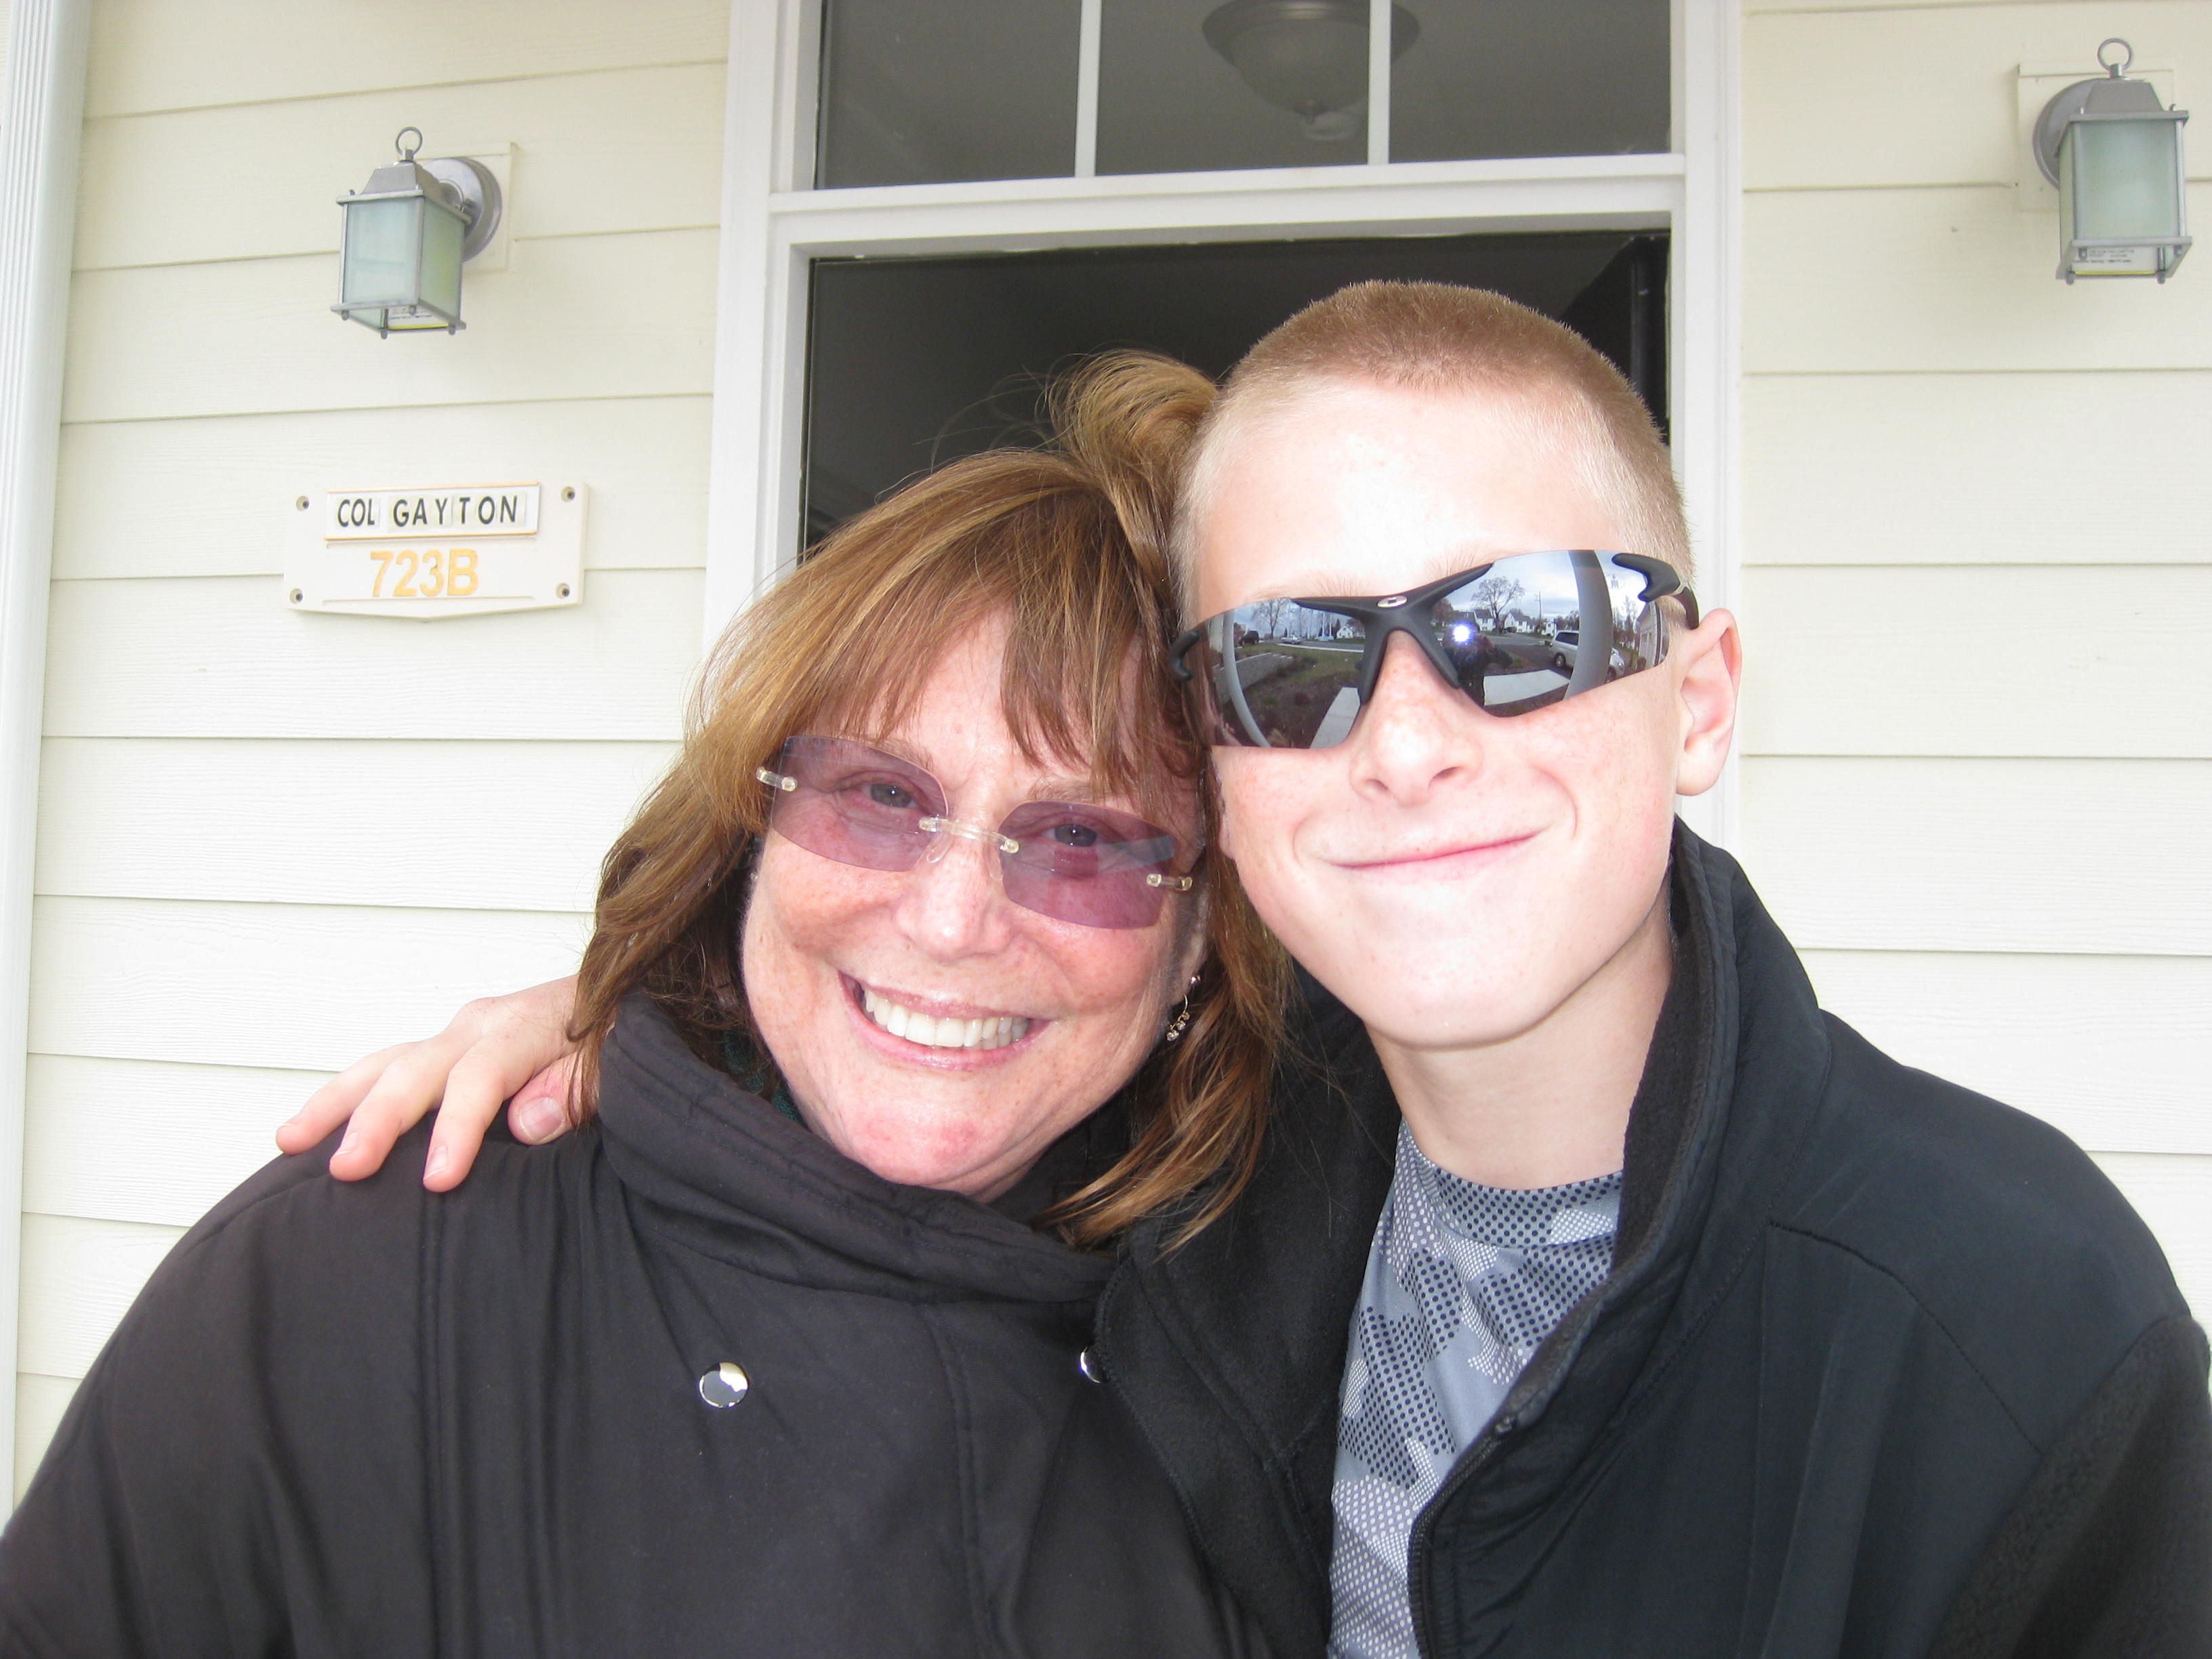 Judy Rogg (l) and her son Erik on March 31, 2010 (Photo courtesy Judy Rogg)